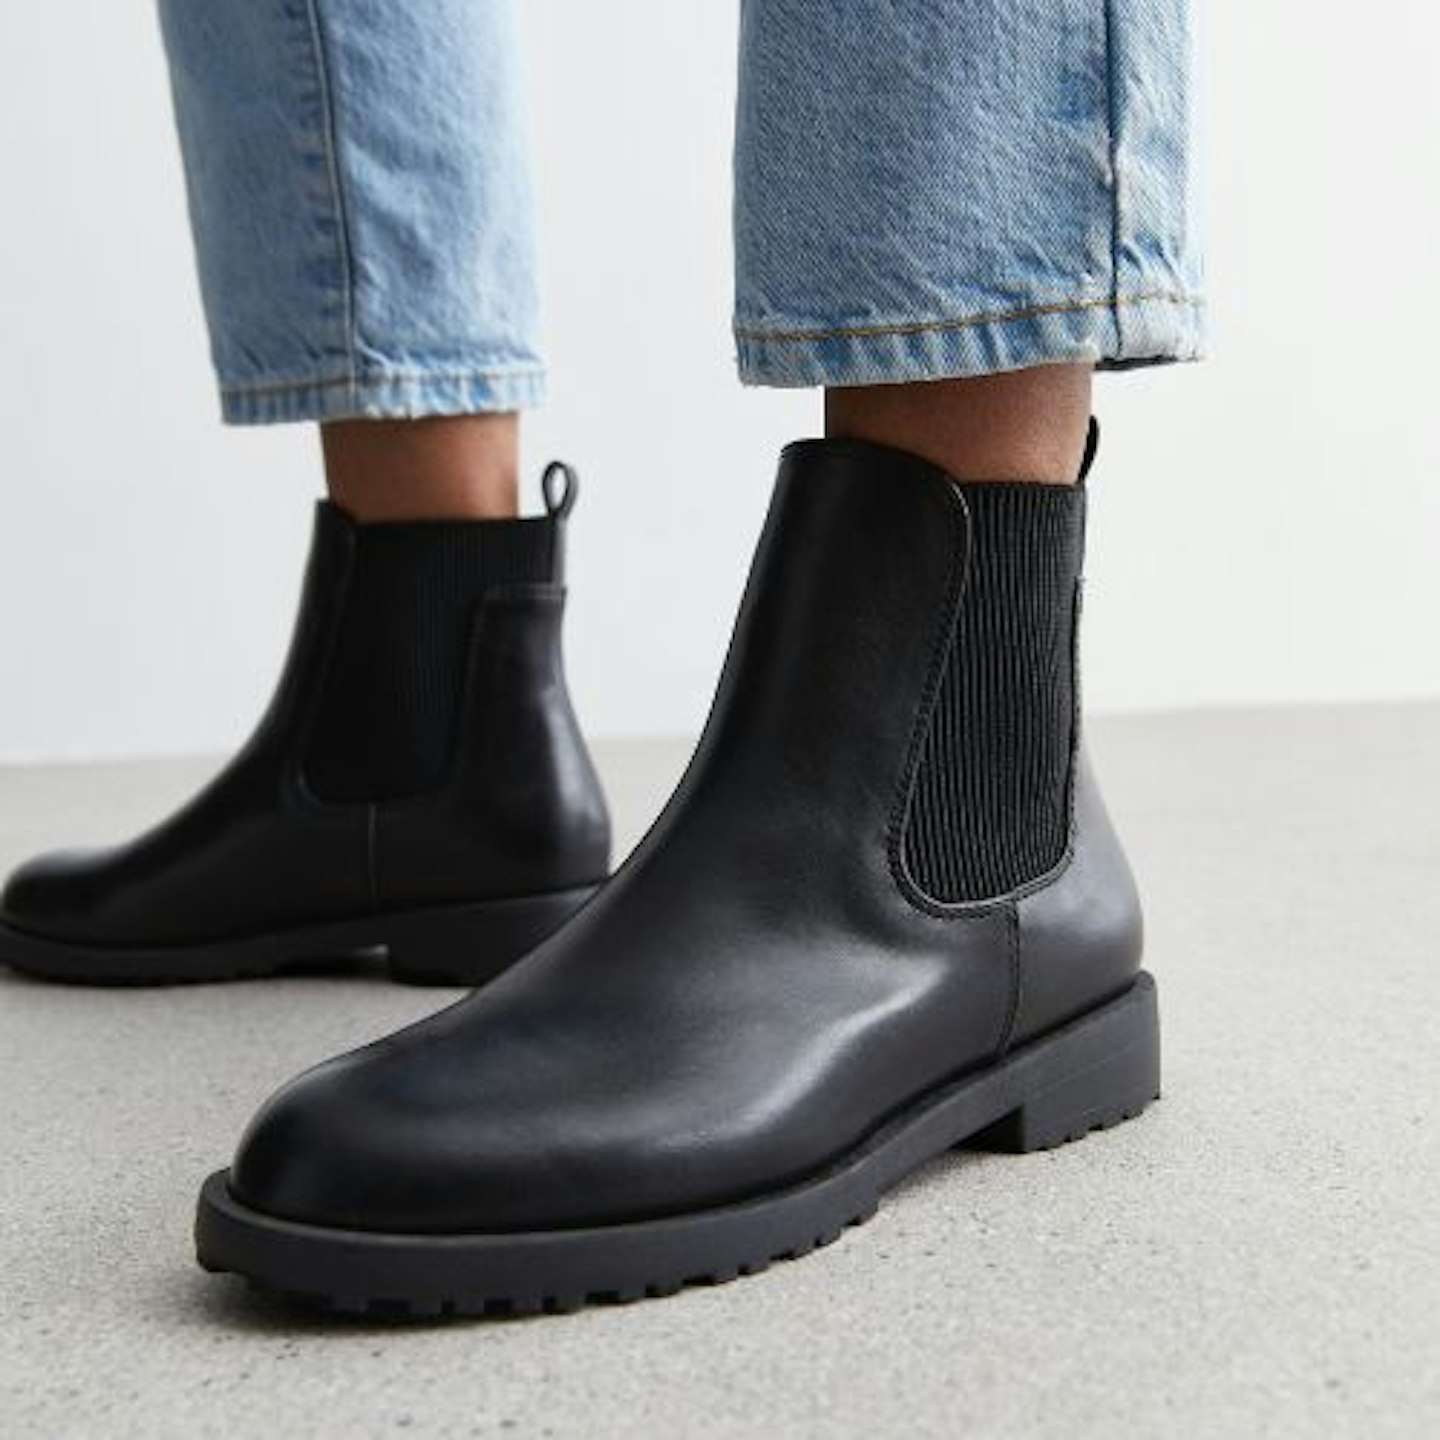 Black Leather-Look Chelsea Boots